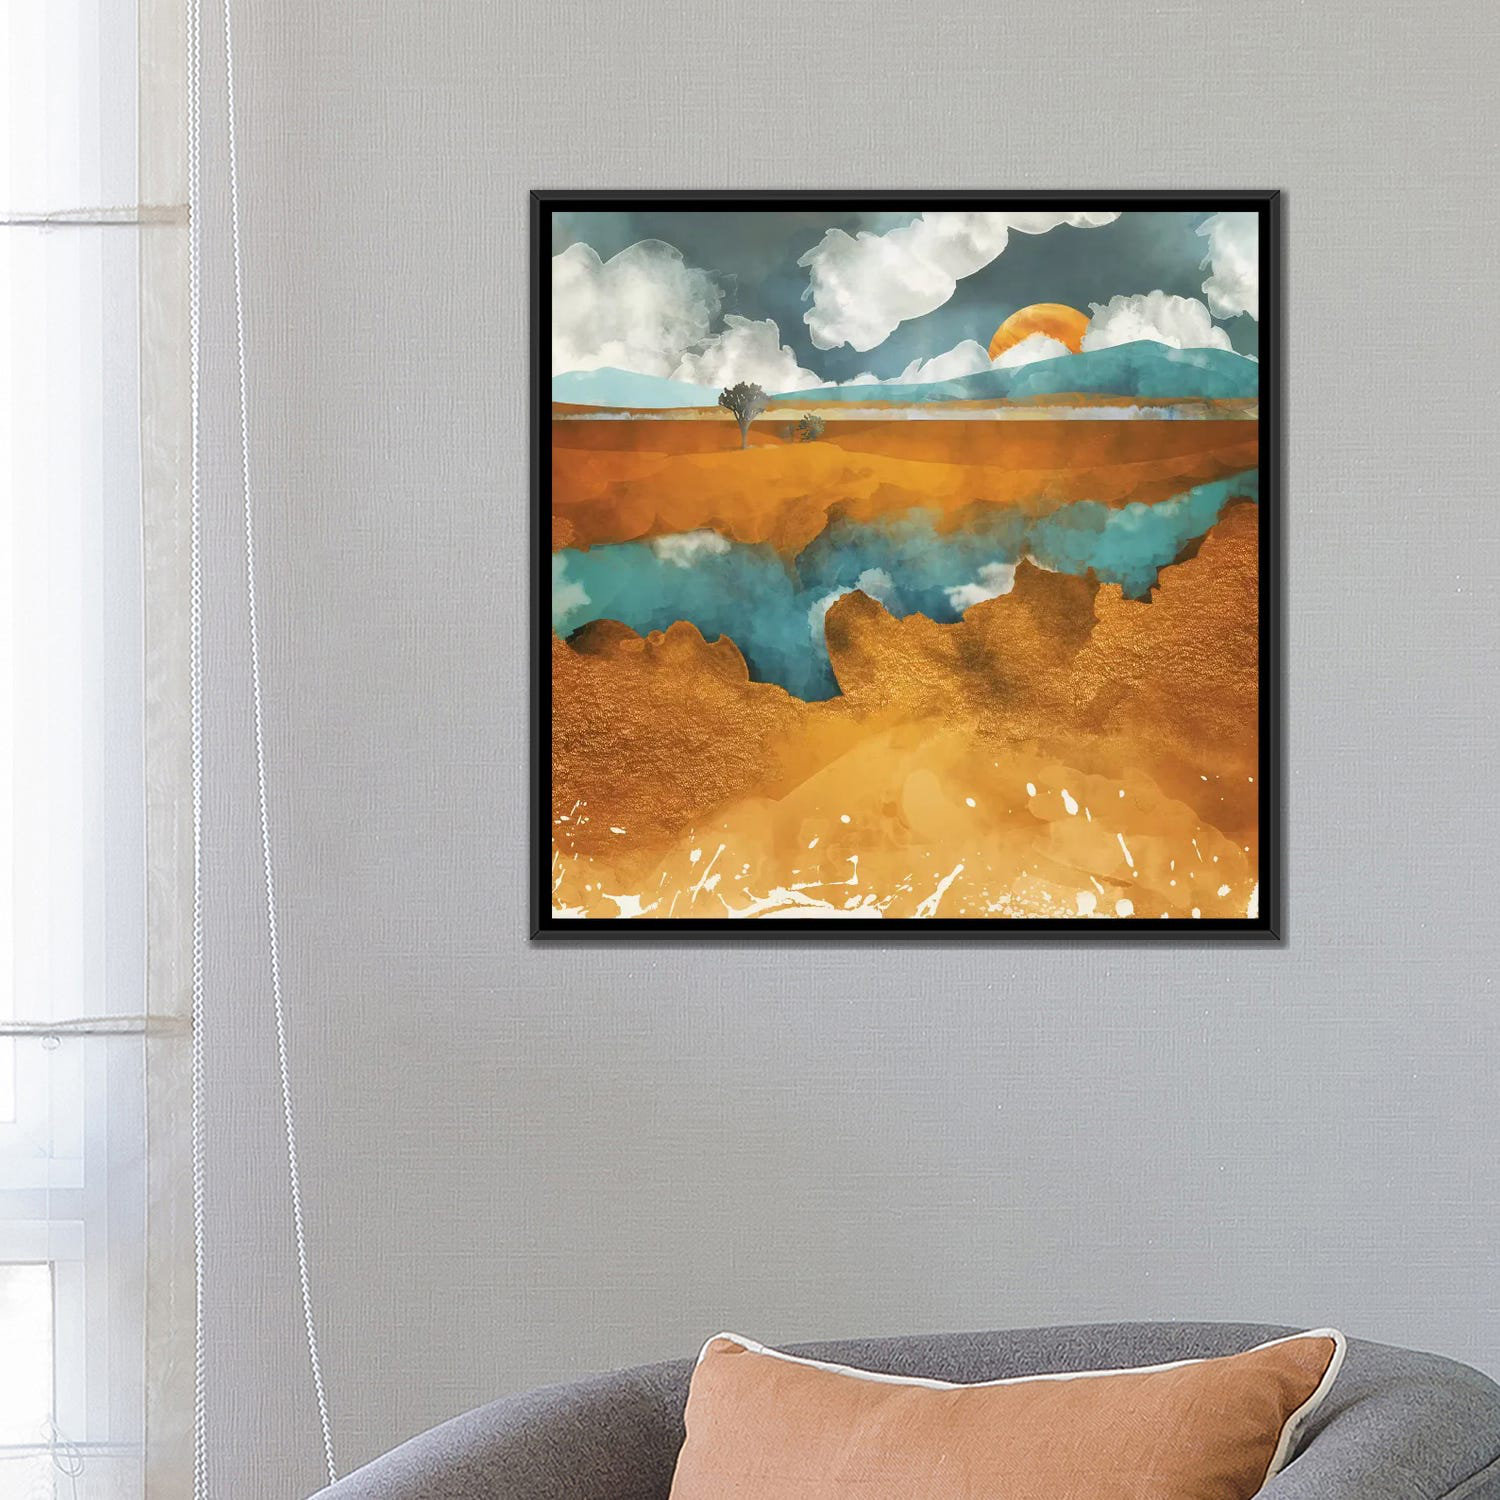 SpaceFrog　SpaceFrog　Canvas　Bless　international　Giclée　Desert　Designs　River　Gallery-Wrapped　by　Designs　Wayfair